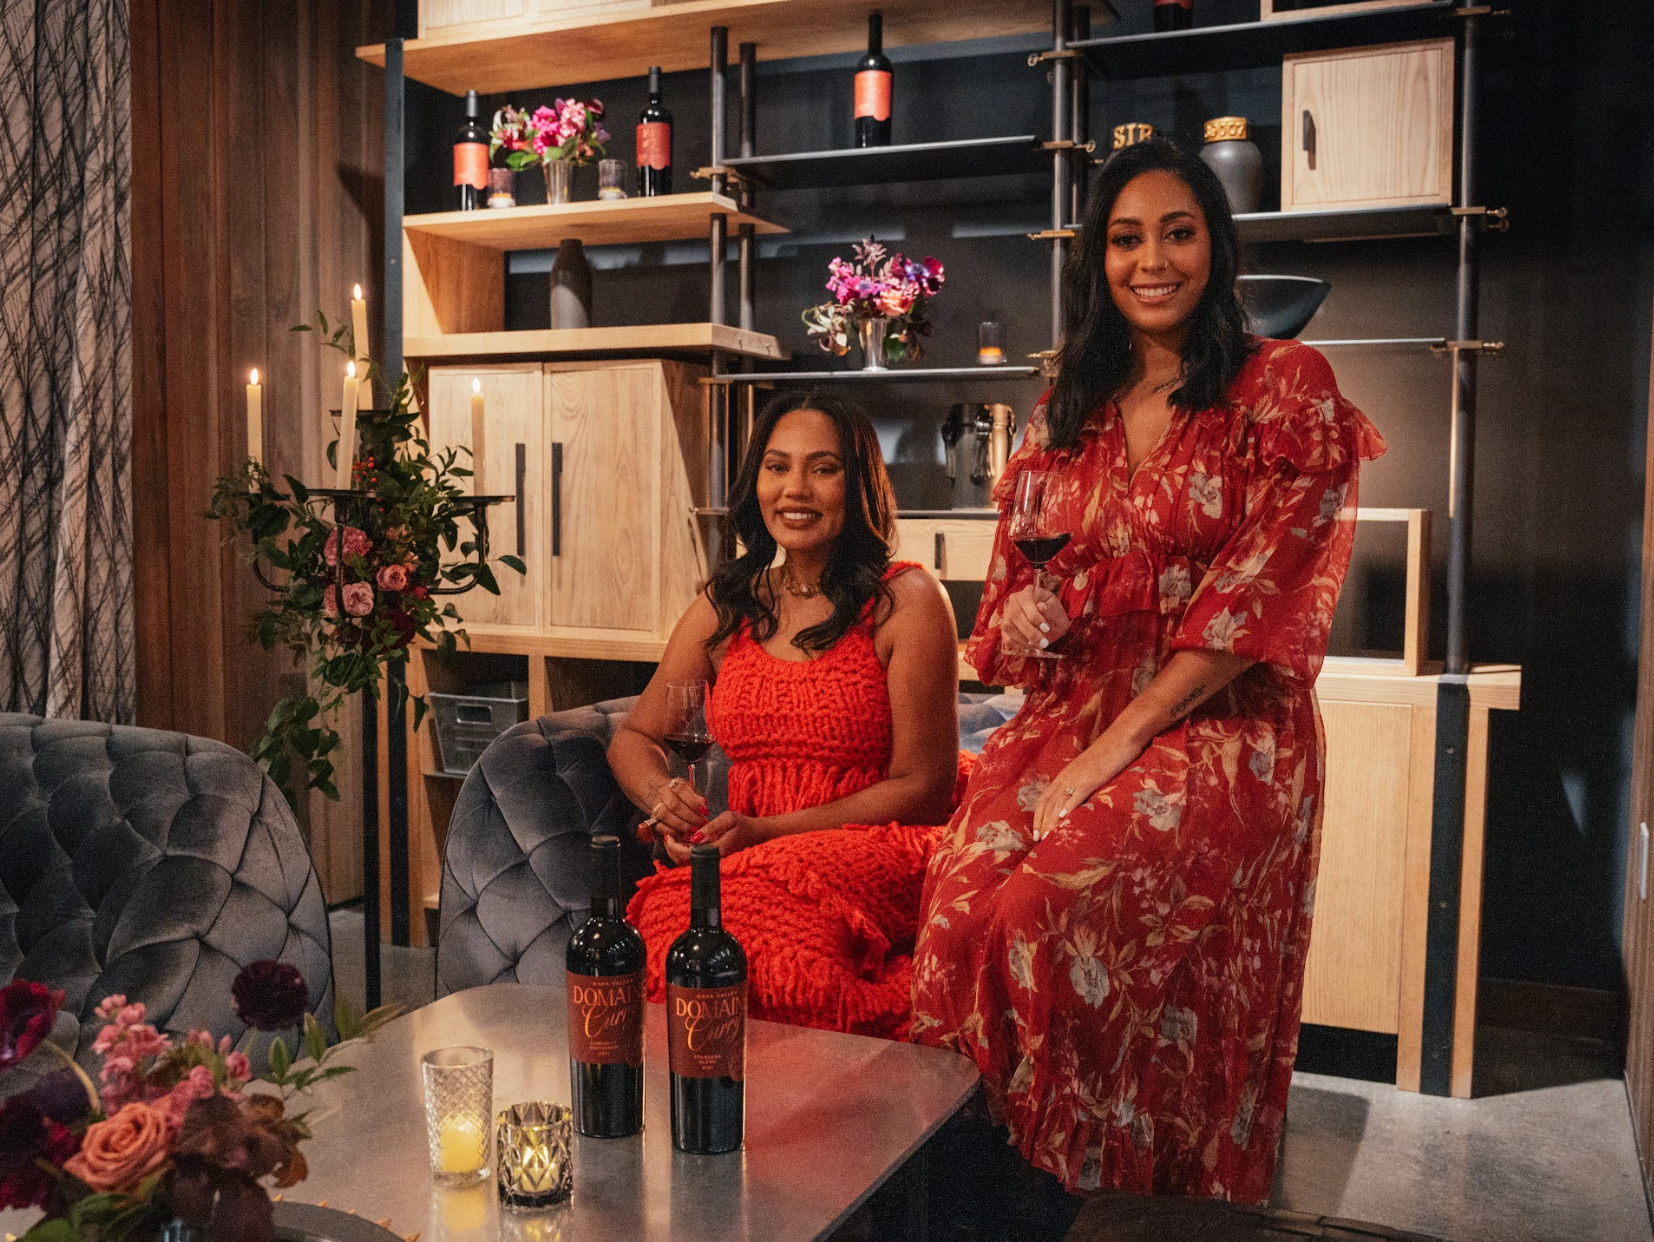 Exclusive: Inside Ayesha Curry And Sydel Curry-Lee’s Swanky Domaine Curry Relaunch Holiday Soiree In Wine Country